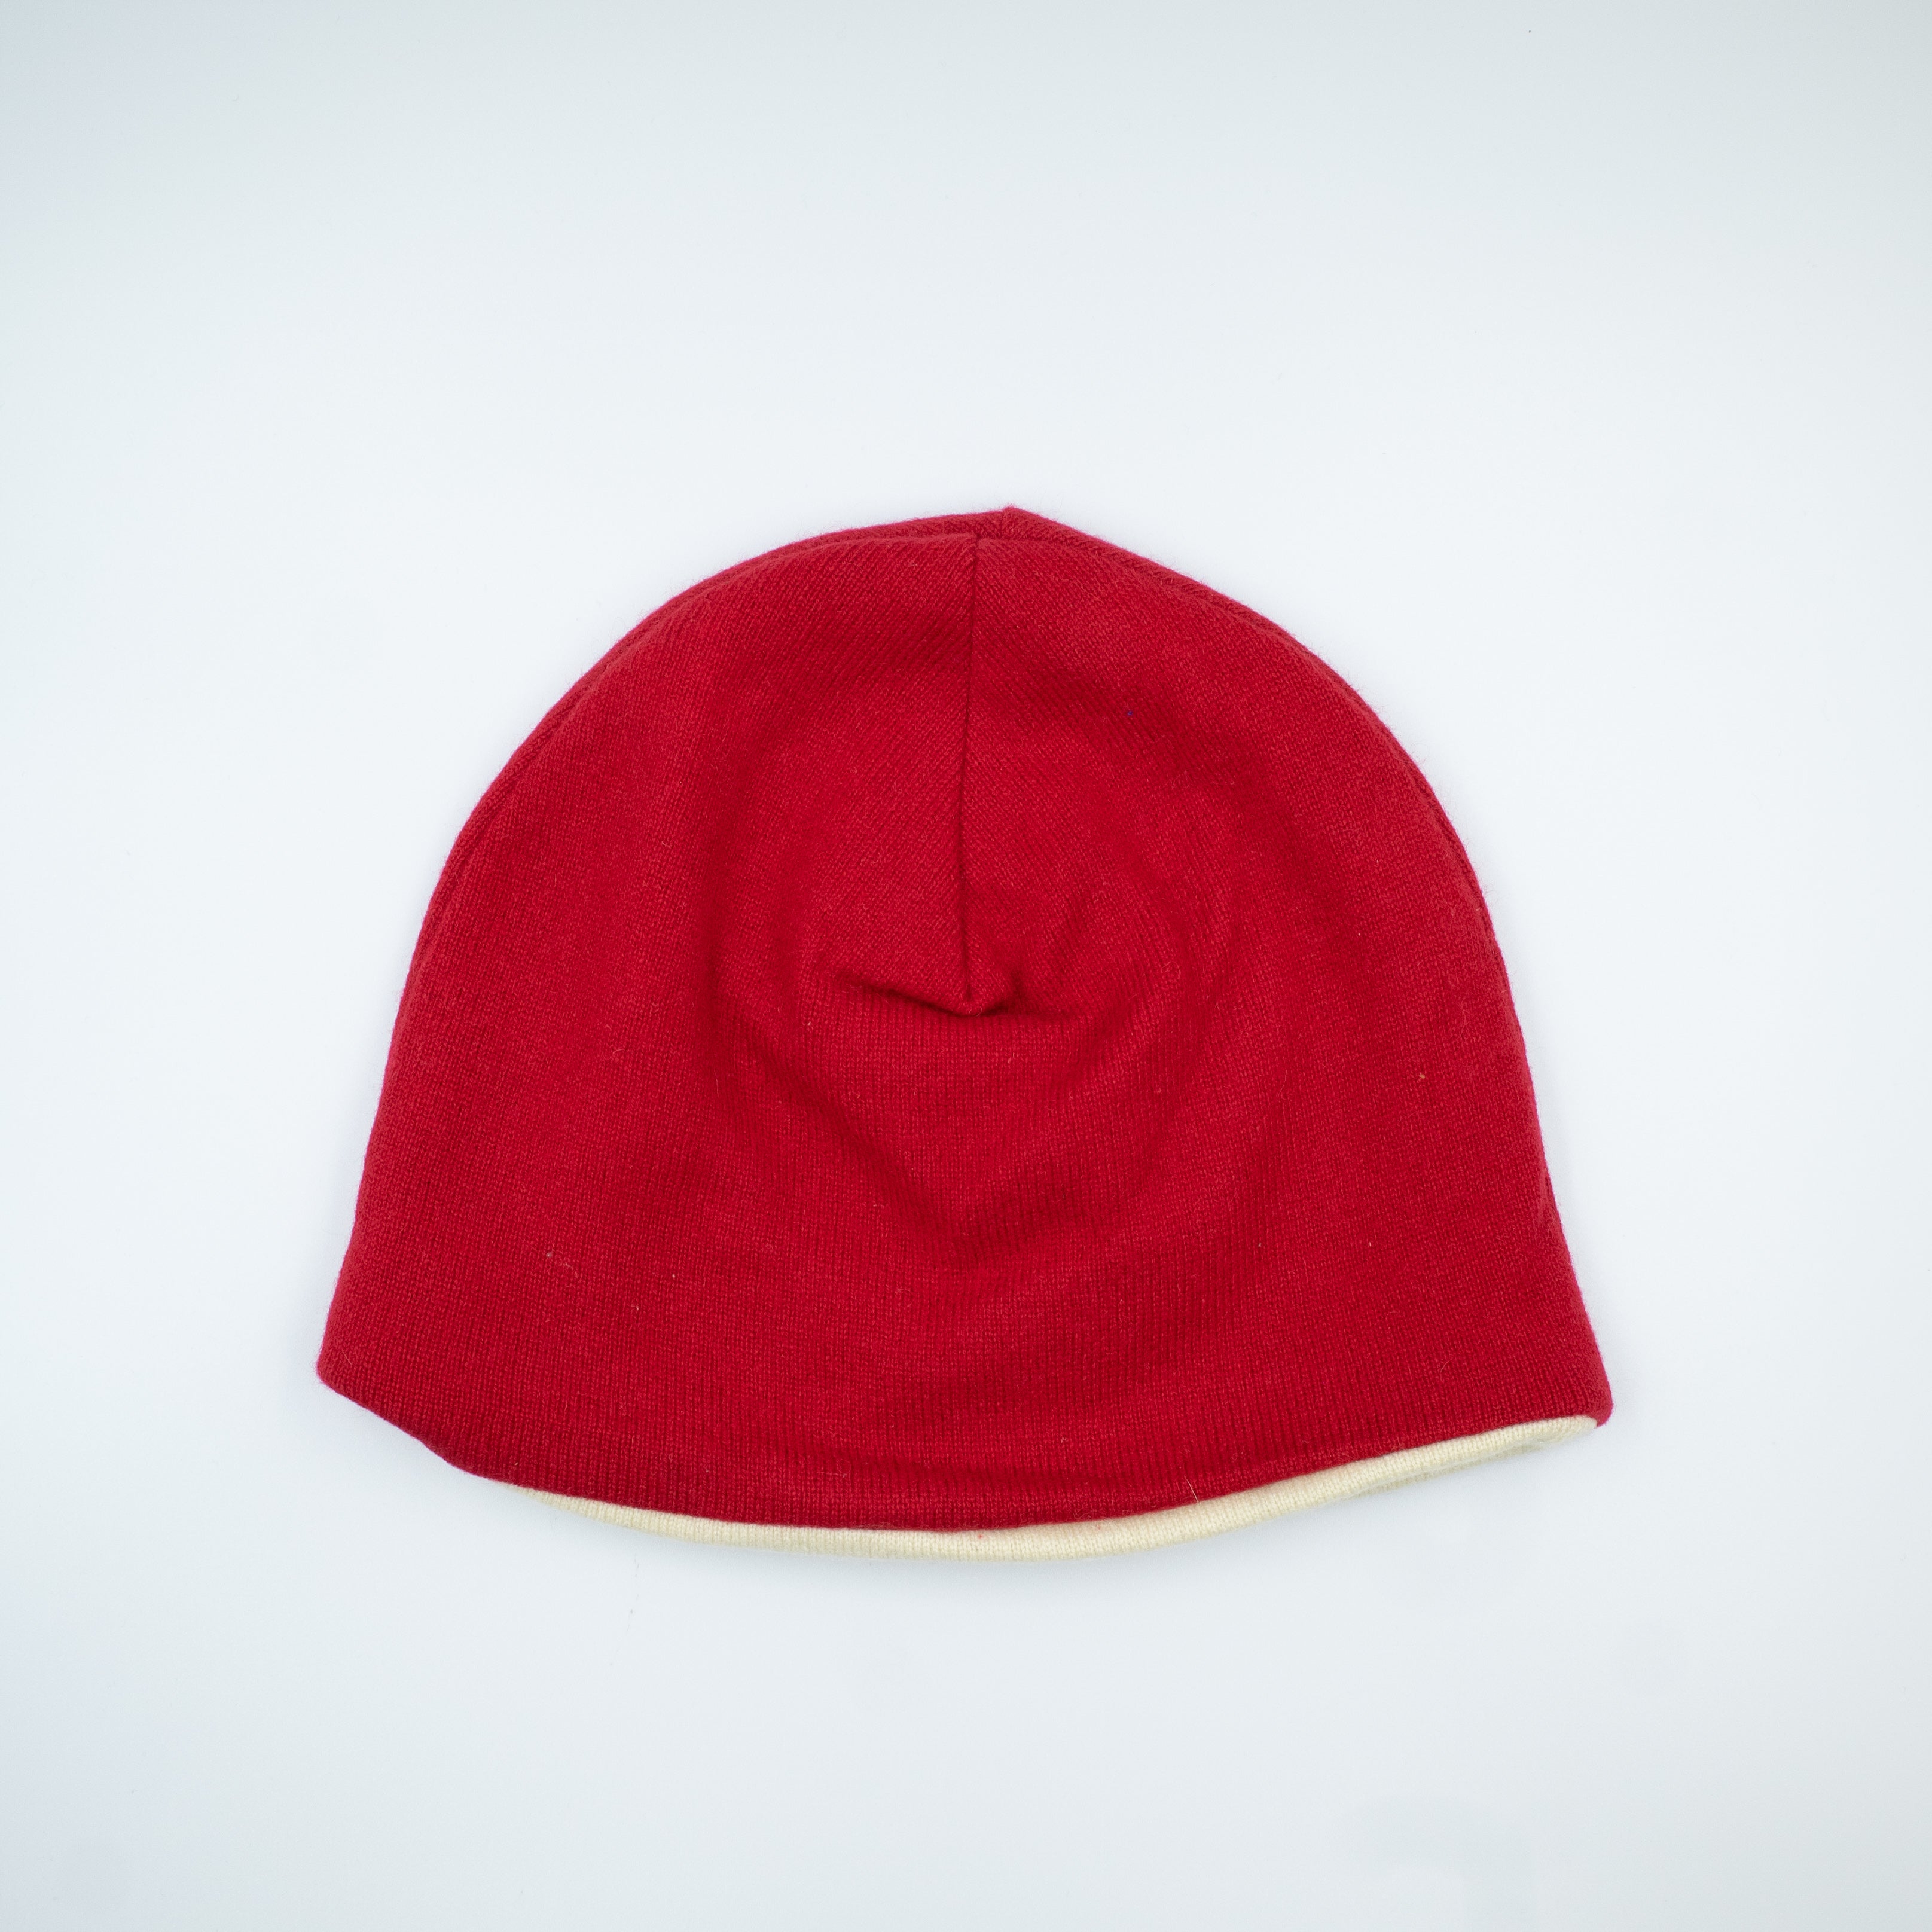 Postbox Red and Cream Cashmere Beanie Hat